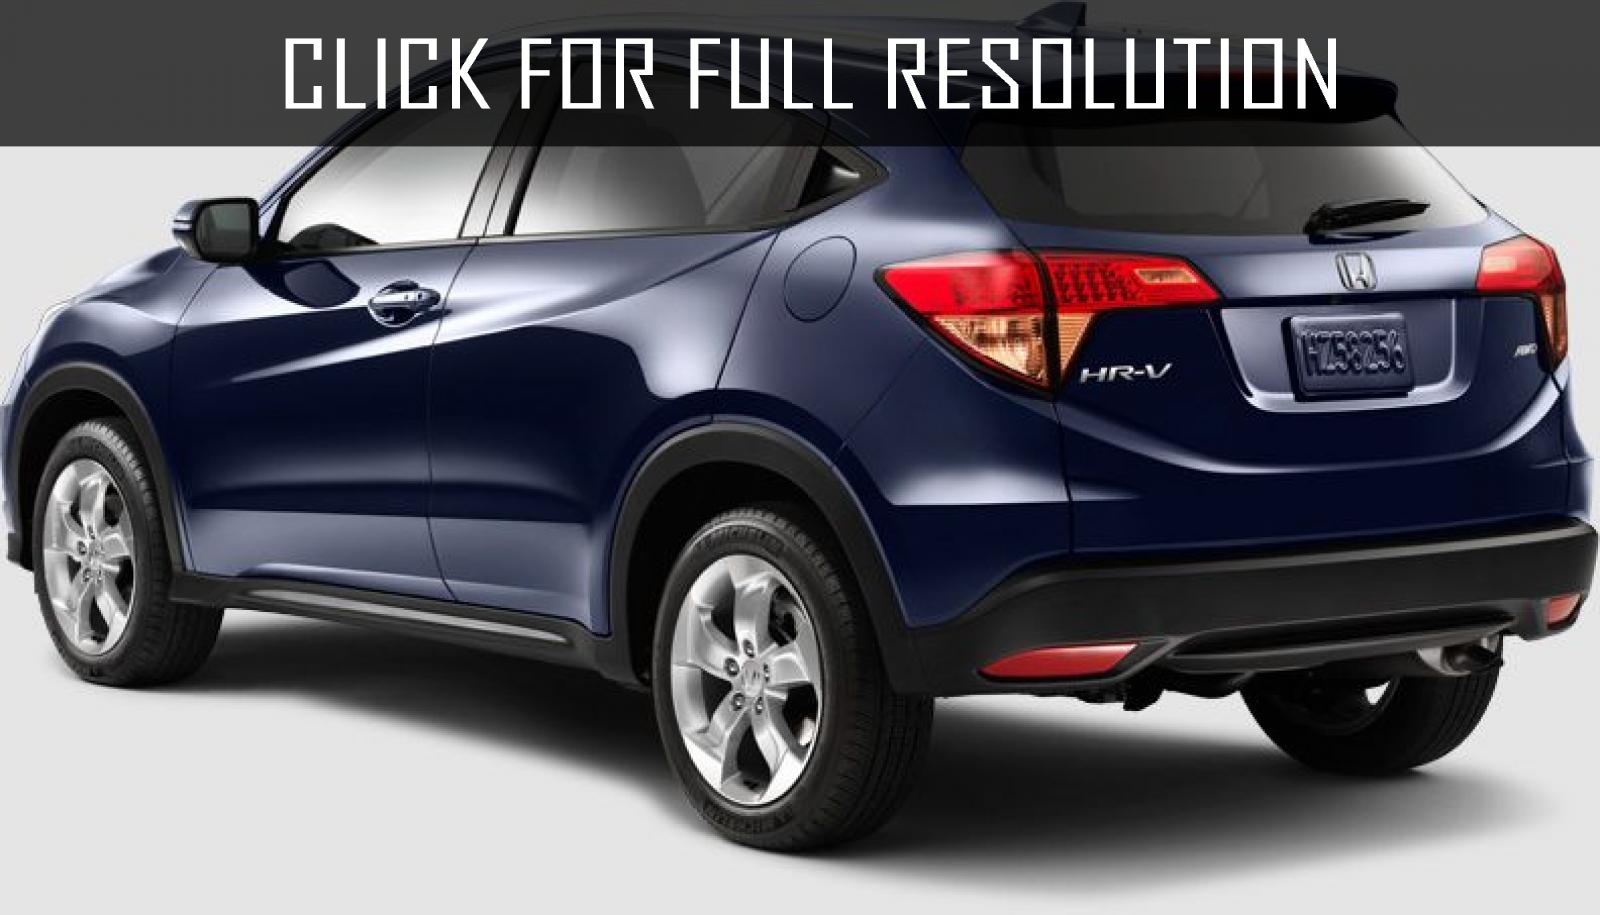 Honda Hybrid Hrv  reviews, prices, ratings with various photos